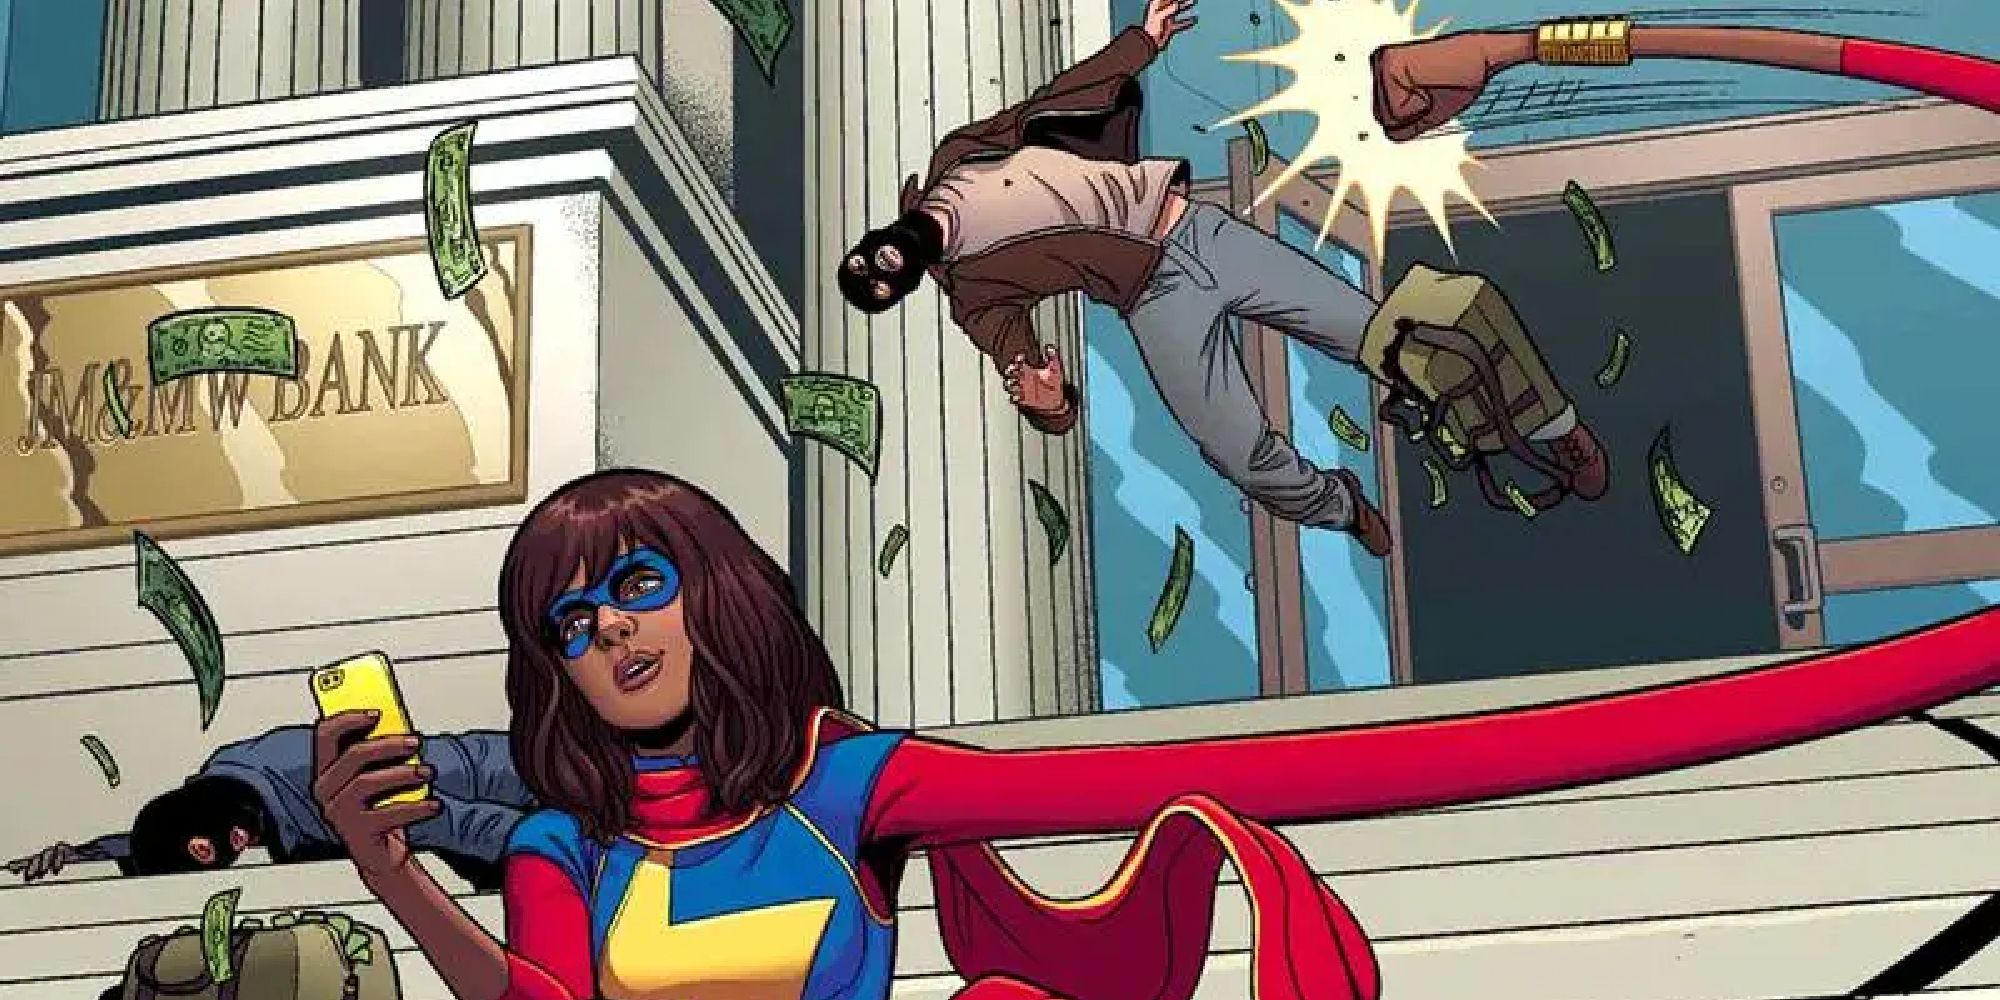 Kamala Khan stretching her arm to punch a crook in the comics